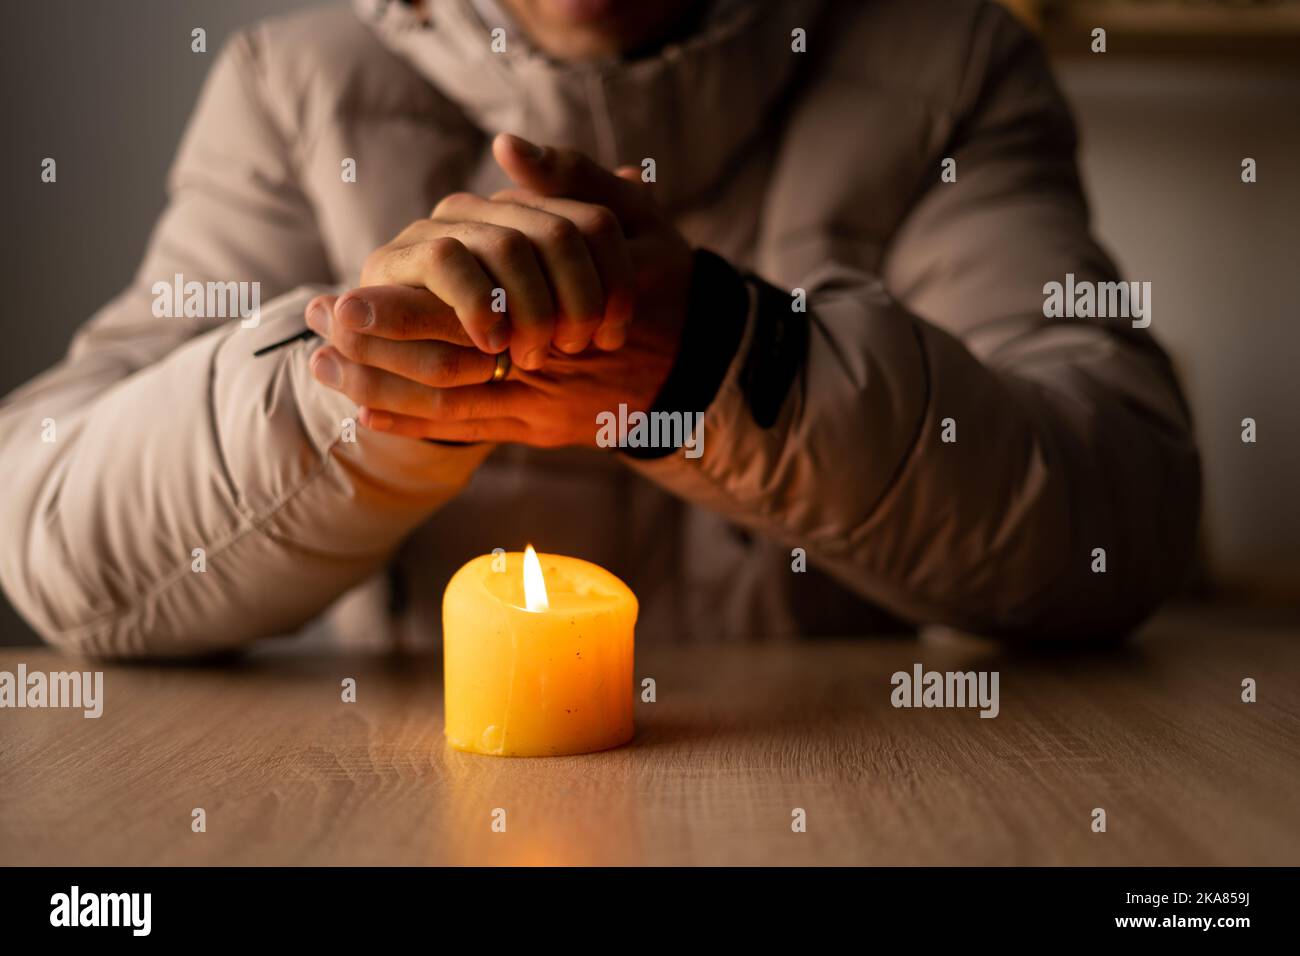 https://c8.alamy.com/comp/2KA859J/shutdown-of-heating-and-electricity-a-man-dressed-in-a-warm-winter-jacket-sits-at-home-at-a-table-and-warms-his-hands-from-a-burning-candle-power-2KA859J.jpg